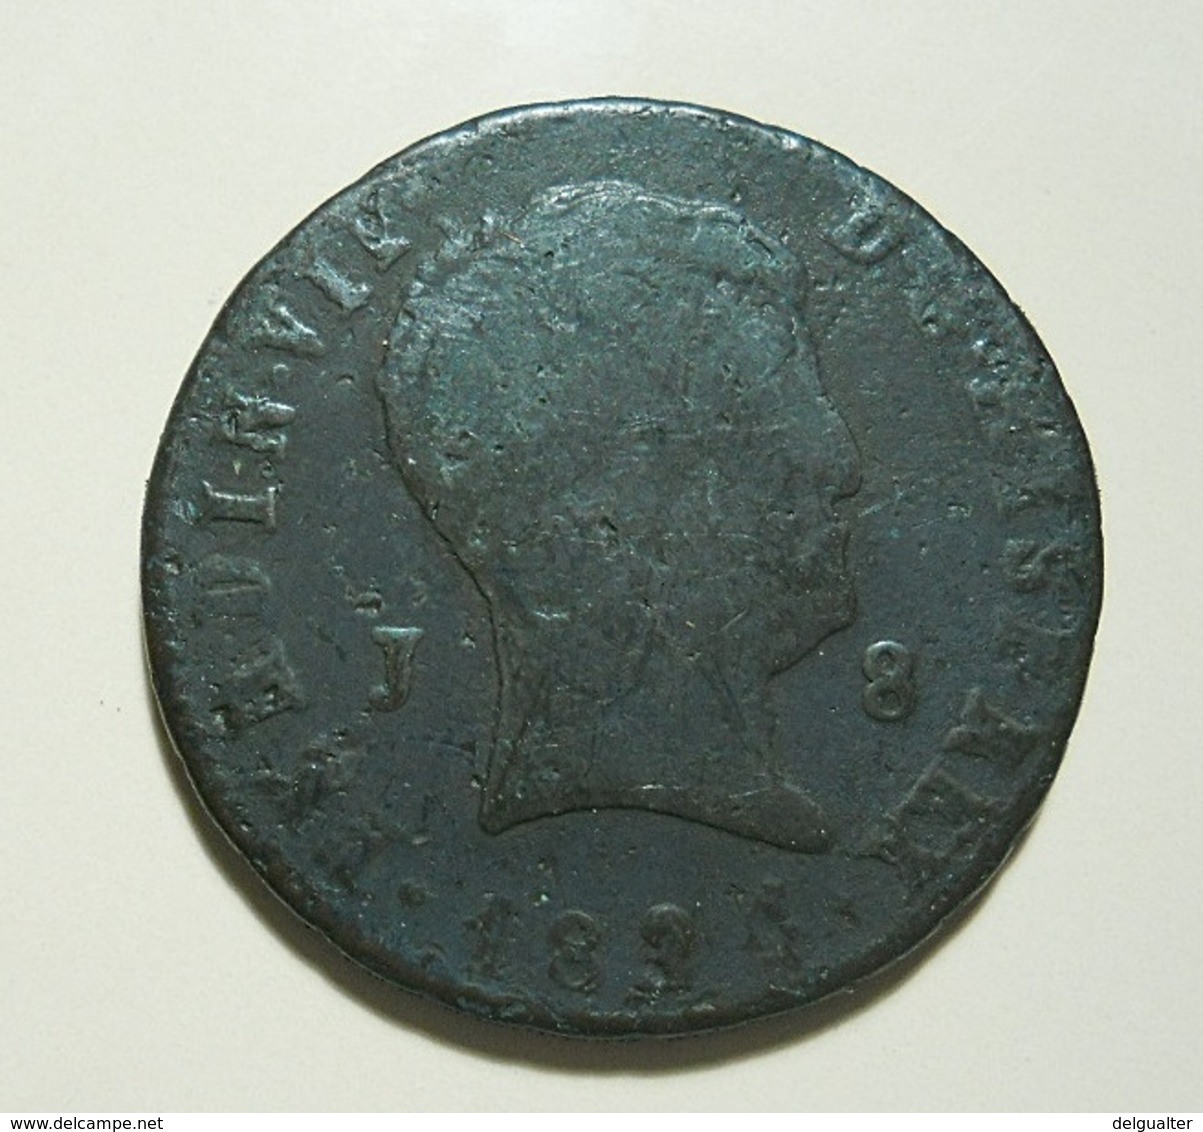 Spain 8 Maravedis 1834?????? To Identify * It Not Appear In Catalog - First Minting